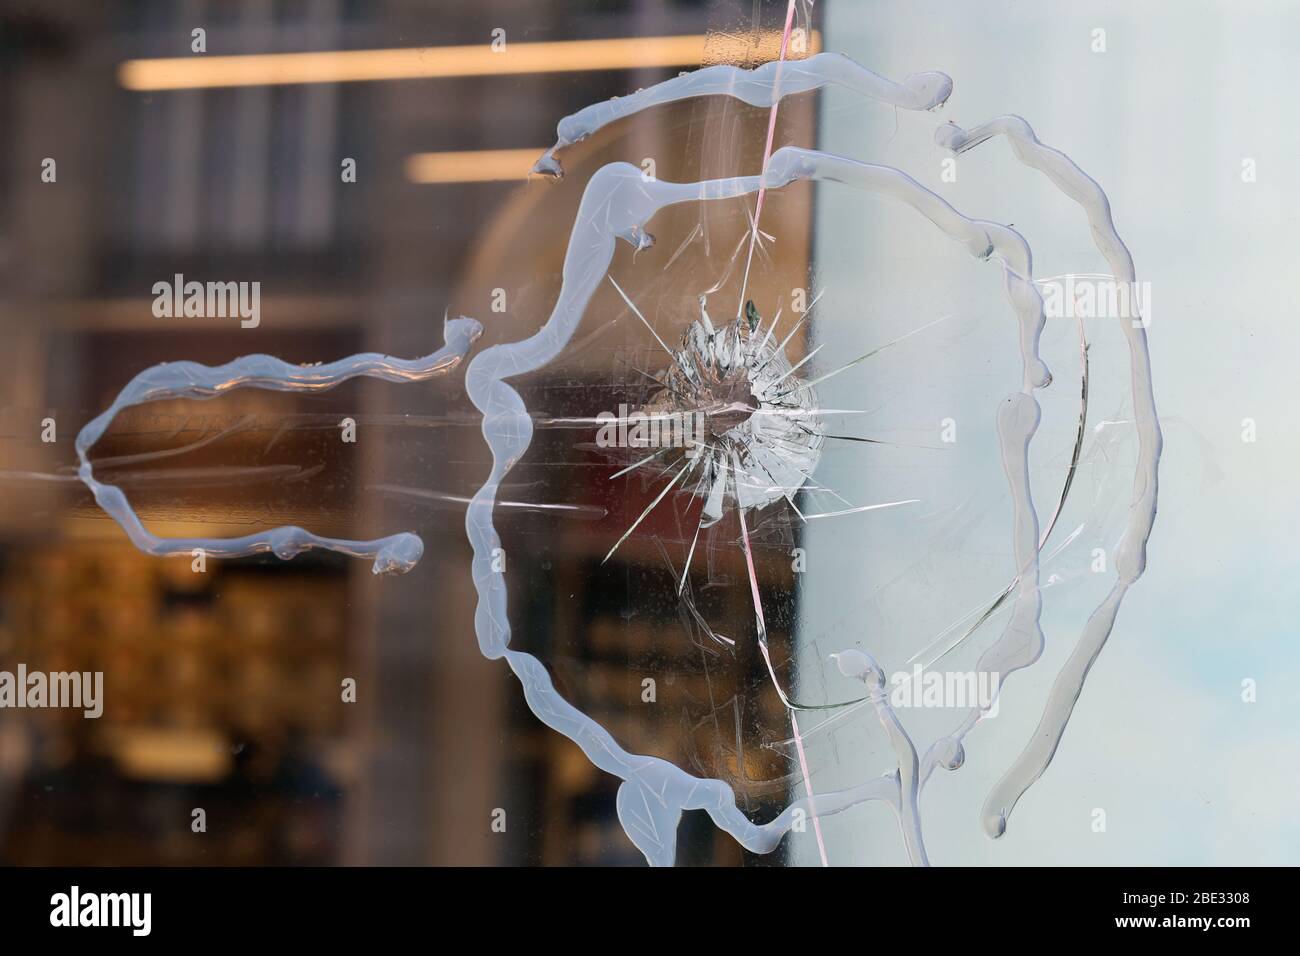 Broken window glass of a store located in downtown Zürich, Switzerland. Crushed and shattered glass, hopefully the insurance will cover the damage. Stock Photo